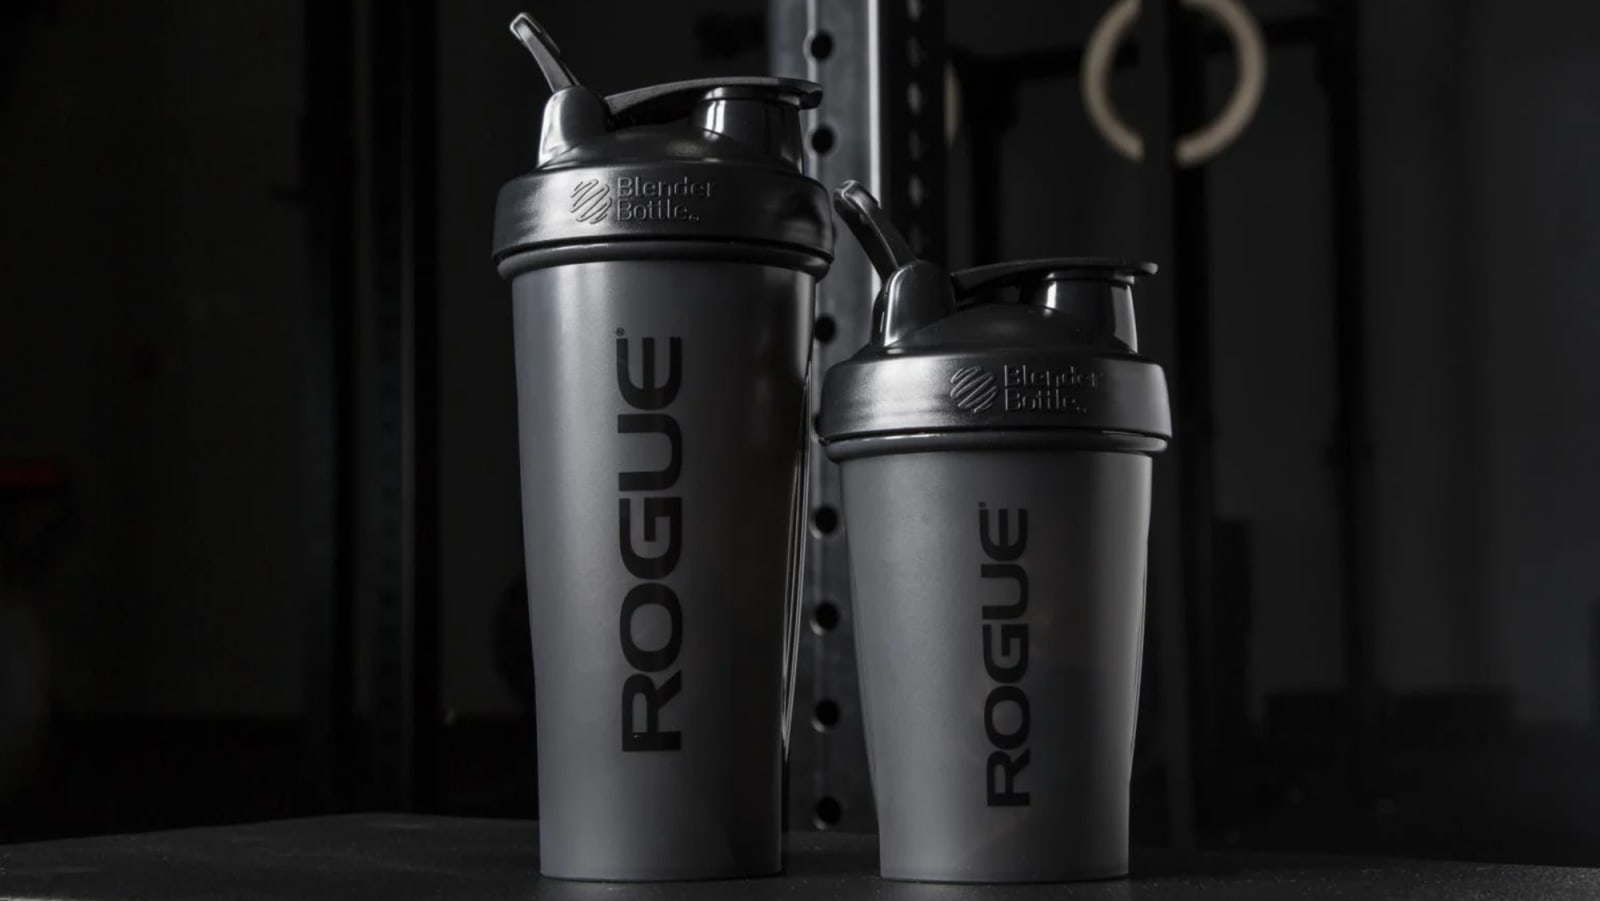 https://assets.roguefitness.com/f_auto,q_auto,c_limit,w_1600,b_rgb:ffffff/catalog/Gear%20and%20Accessories/Accessories/Shakers%20and%20Bottles/BB00V20/BB00V20-H_kawrih.png